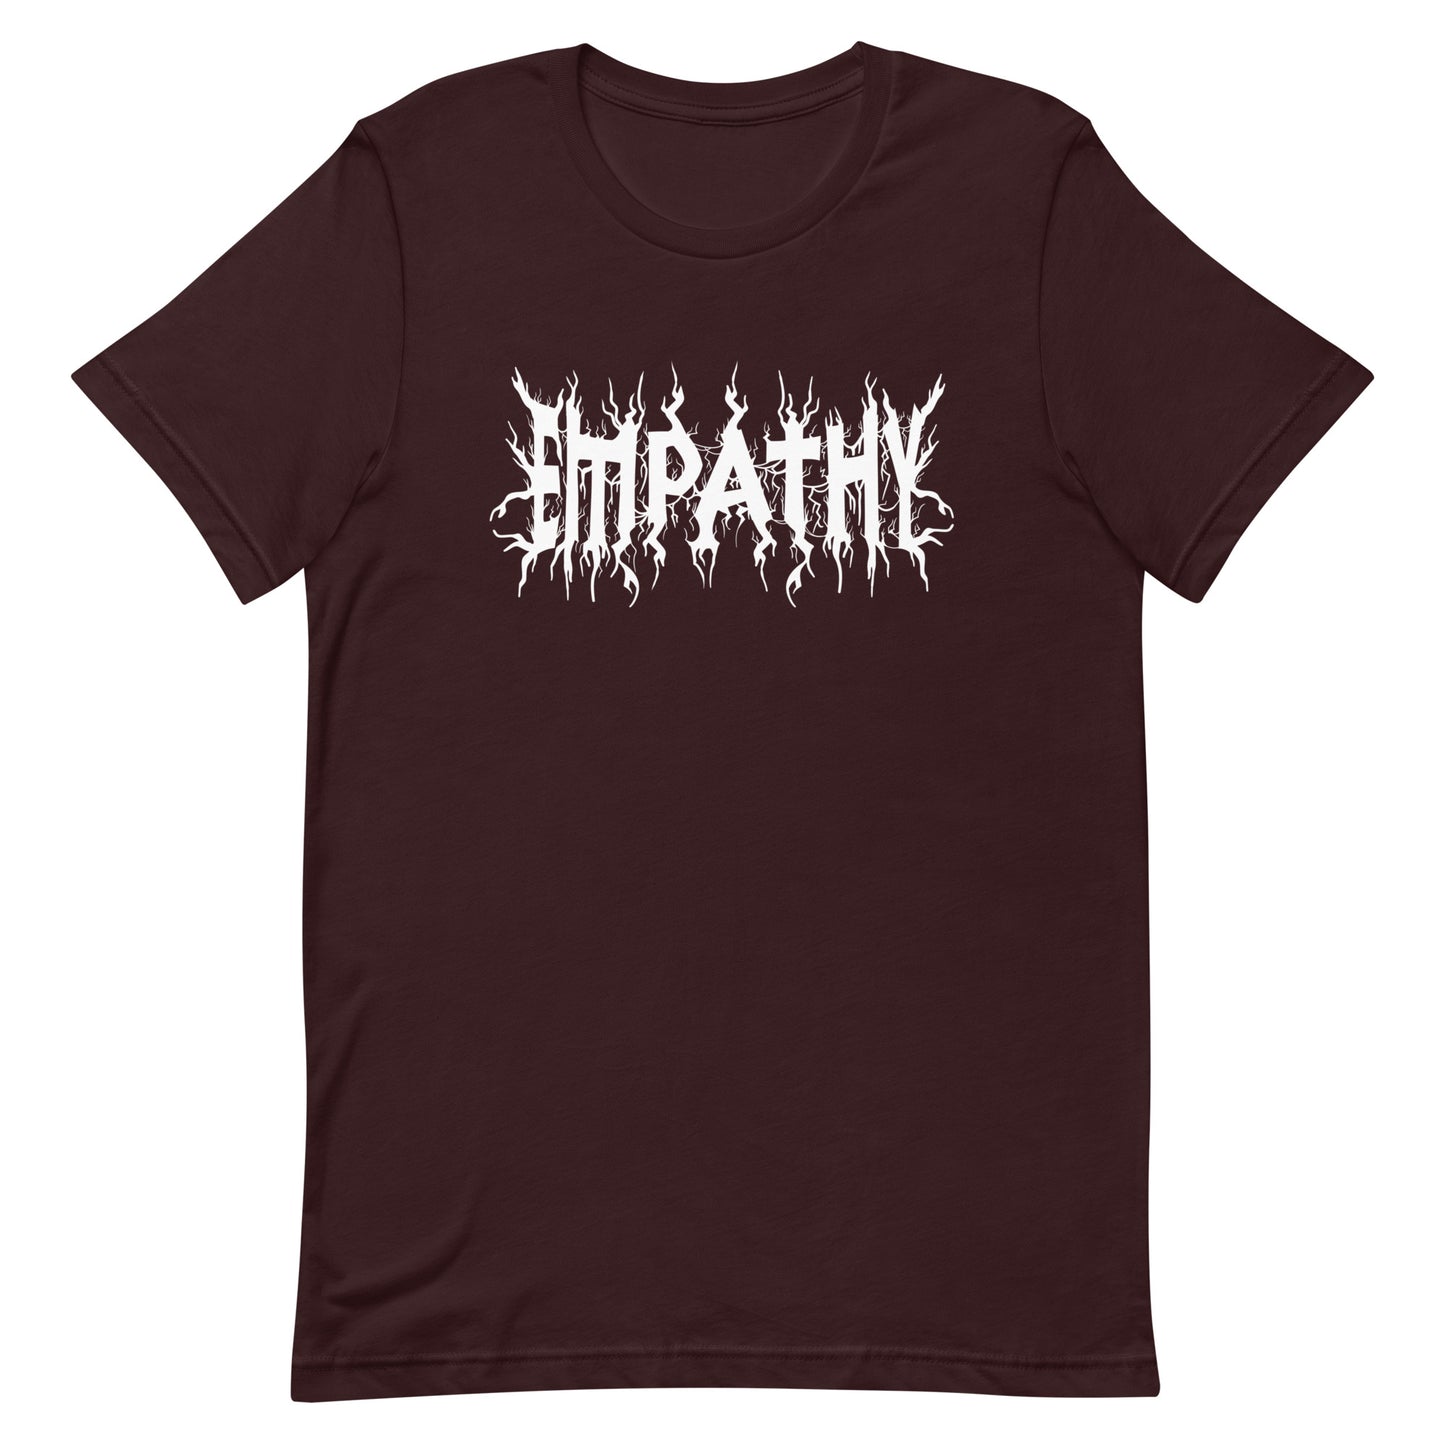 A dark red crewneck t-shirt featuring white text that reads "Empathy" in a jagged font in the style of heavy metal band t-shirts